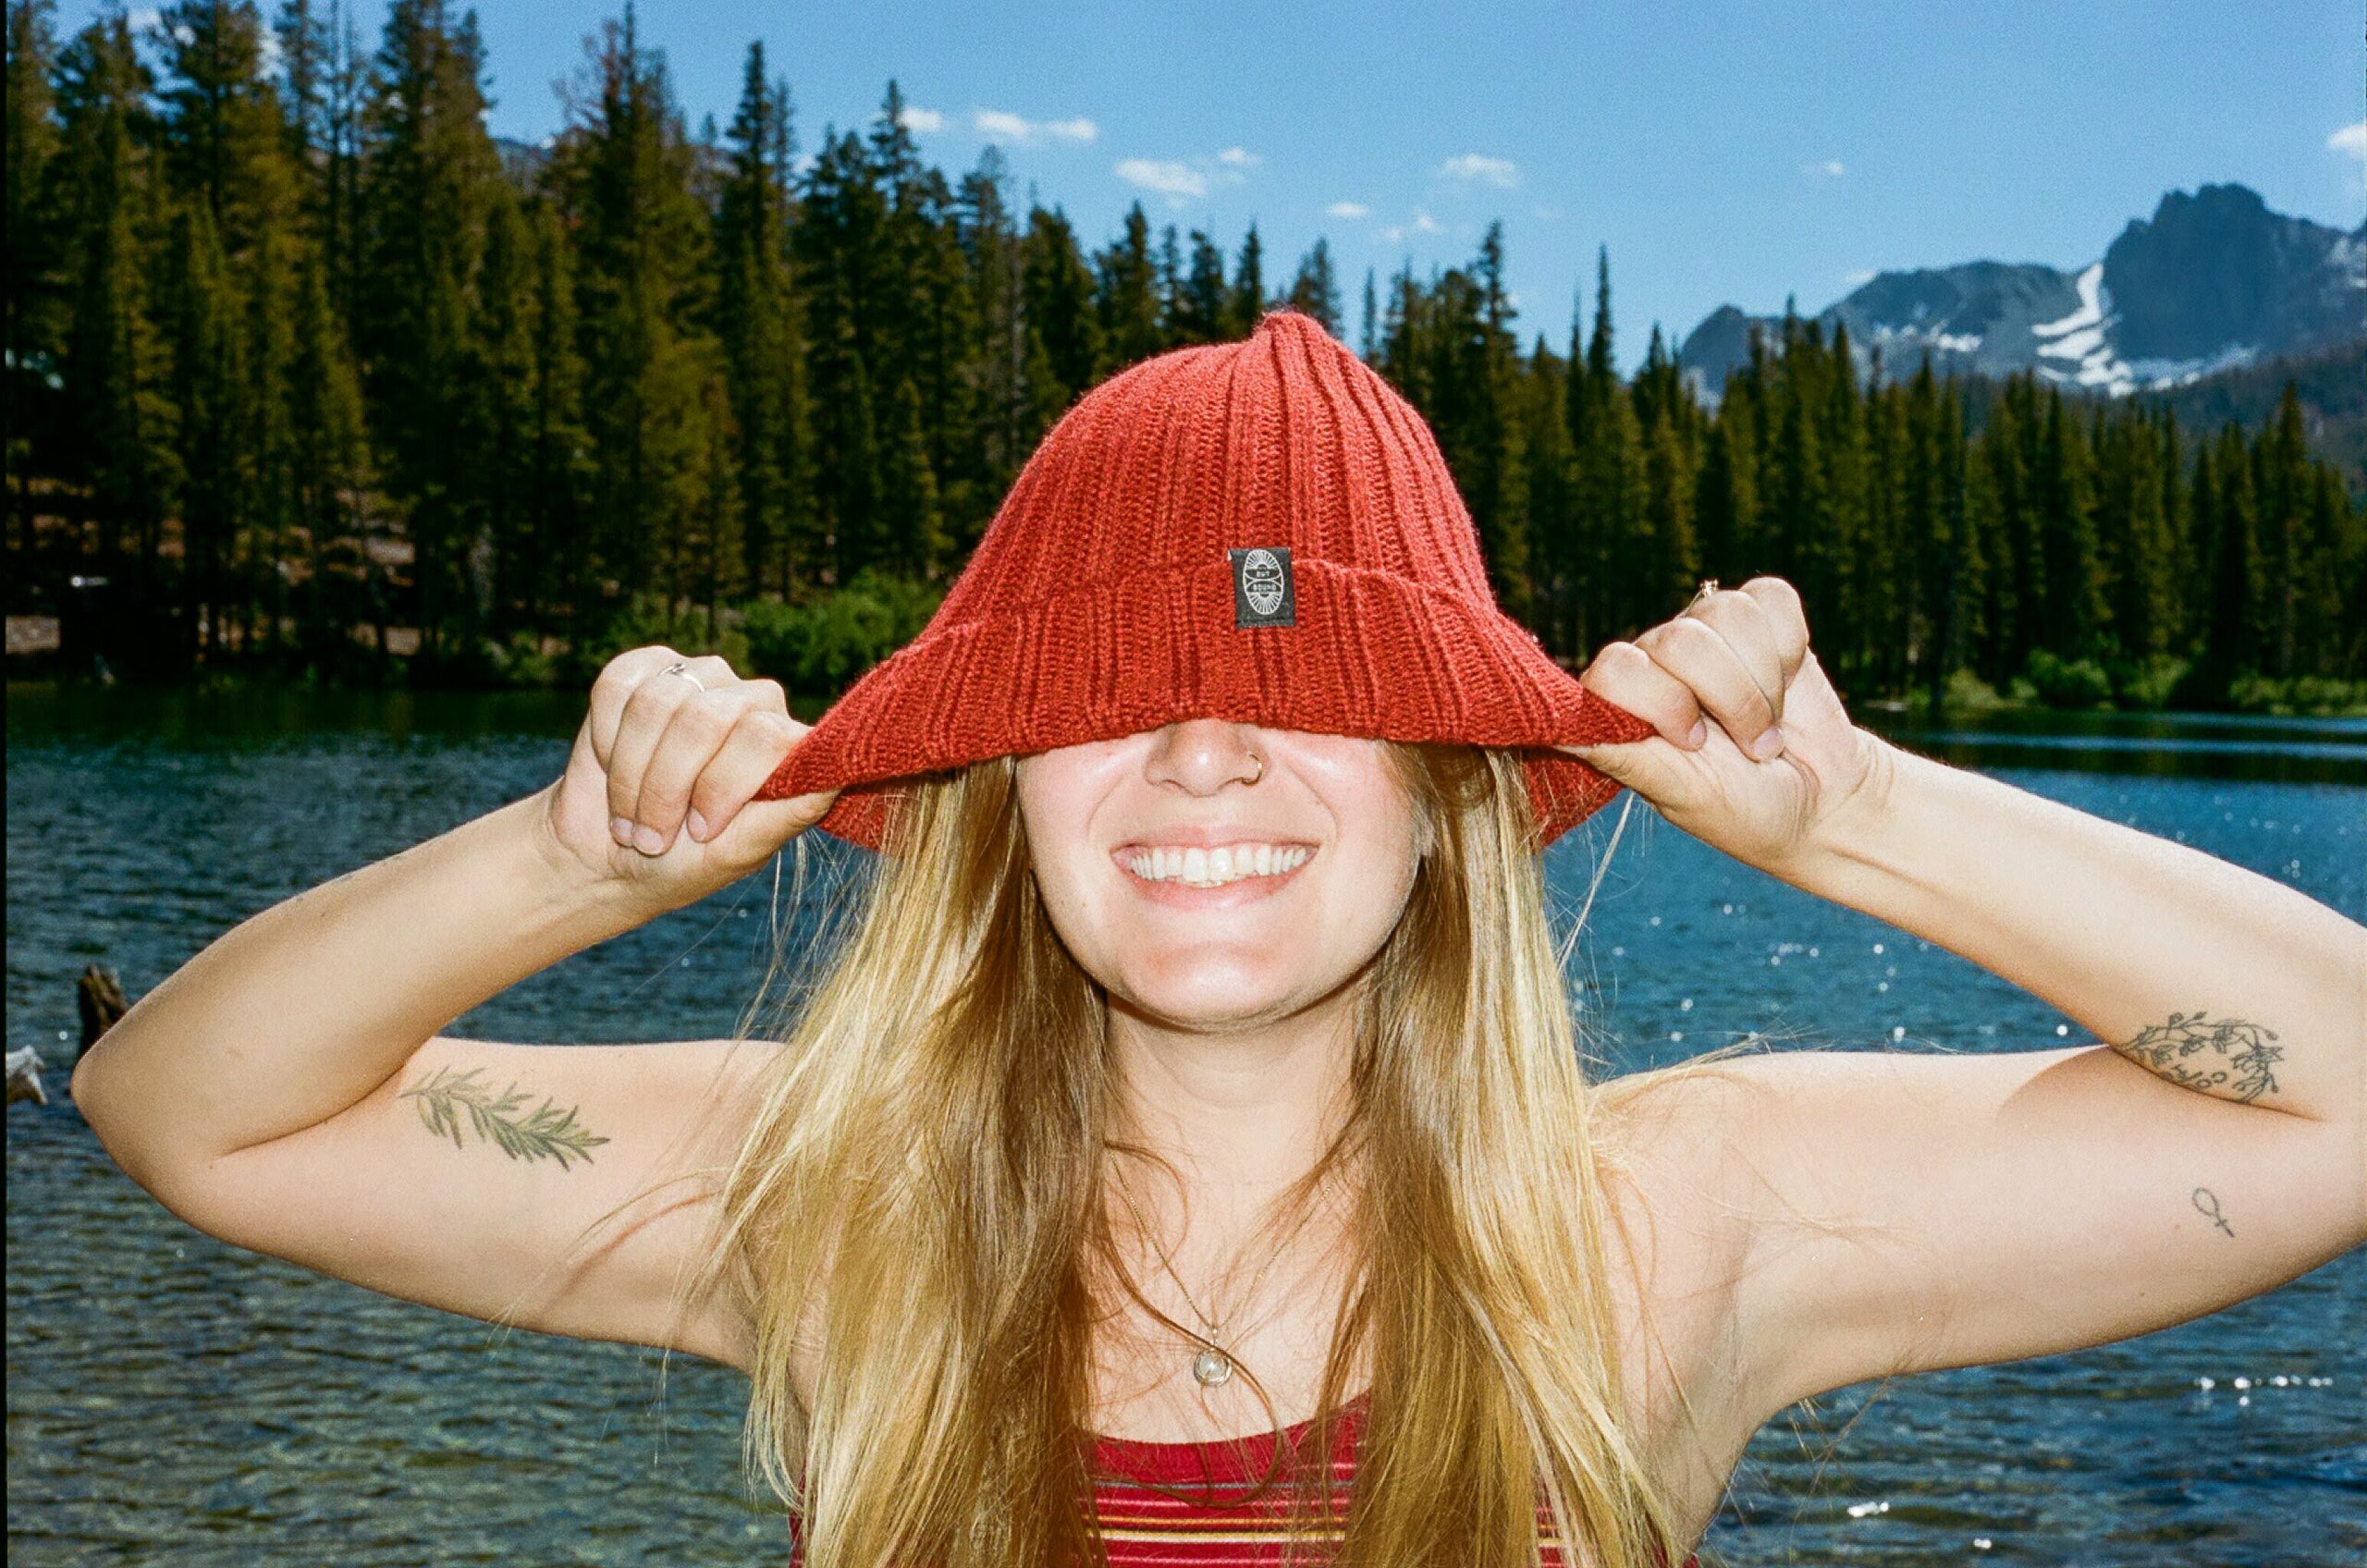 A lady in a red cap posing for a photo by the sea with tall trees in the background.